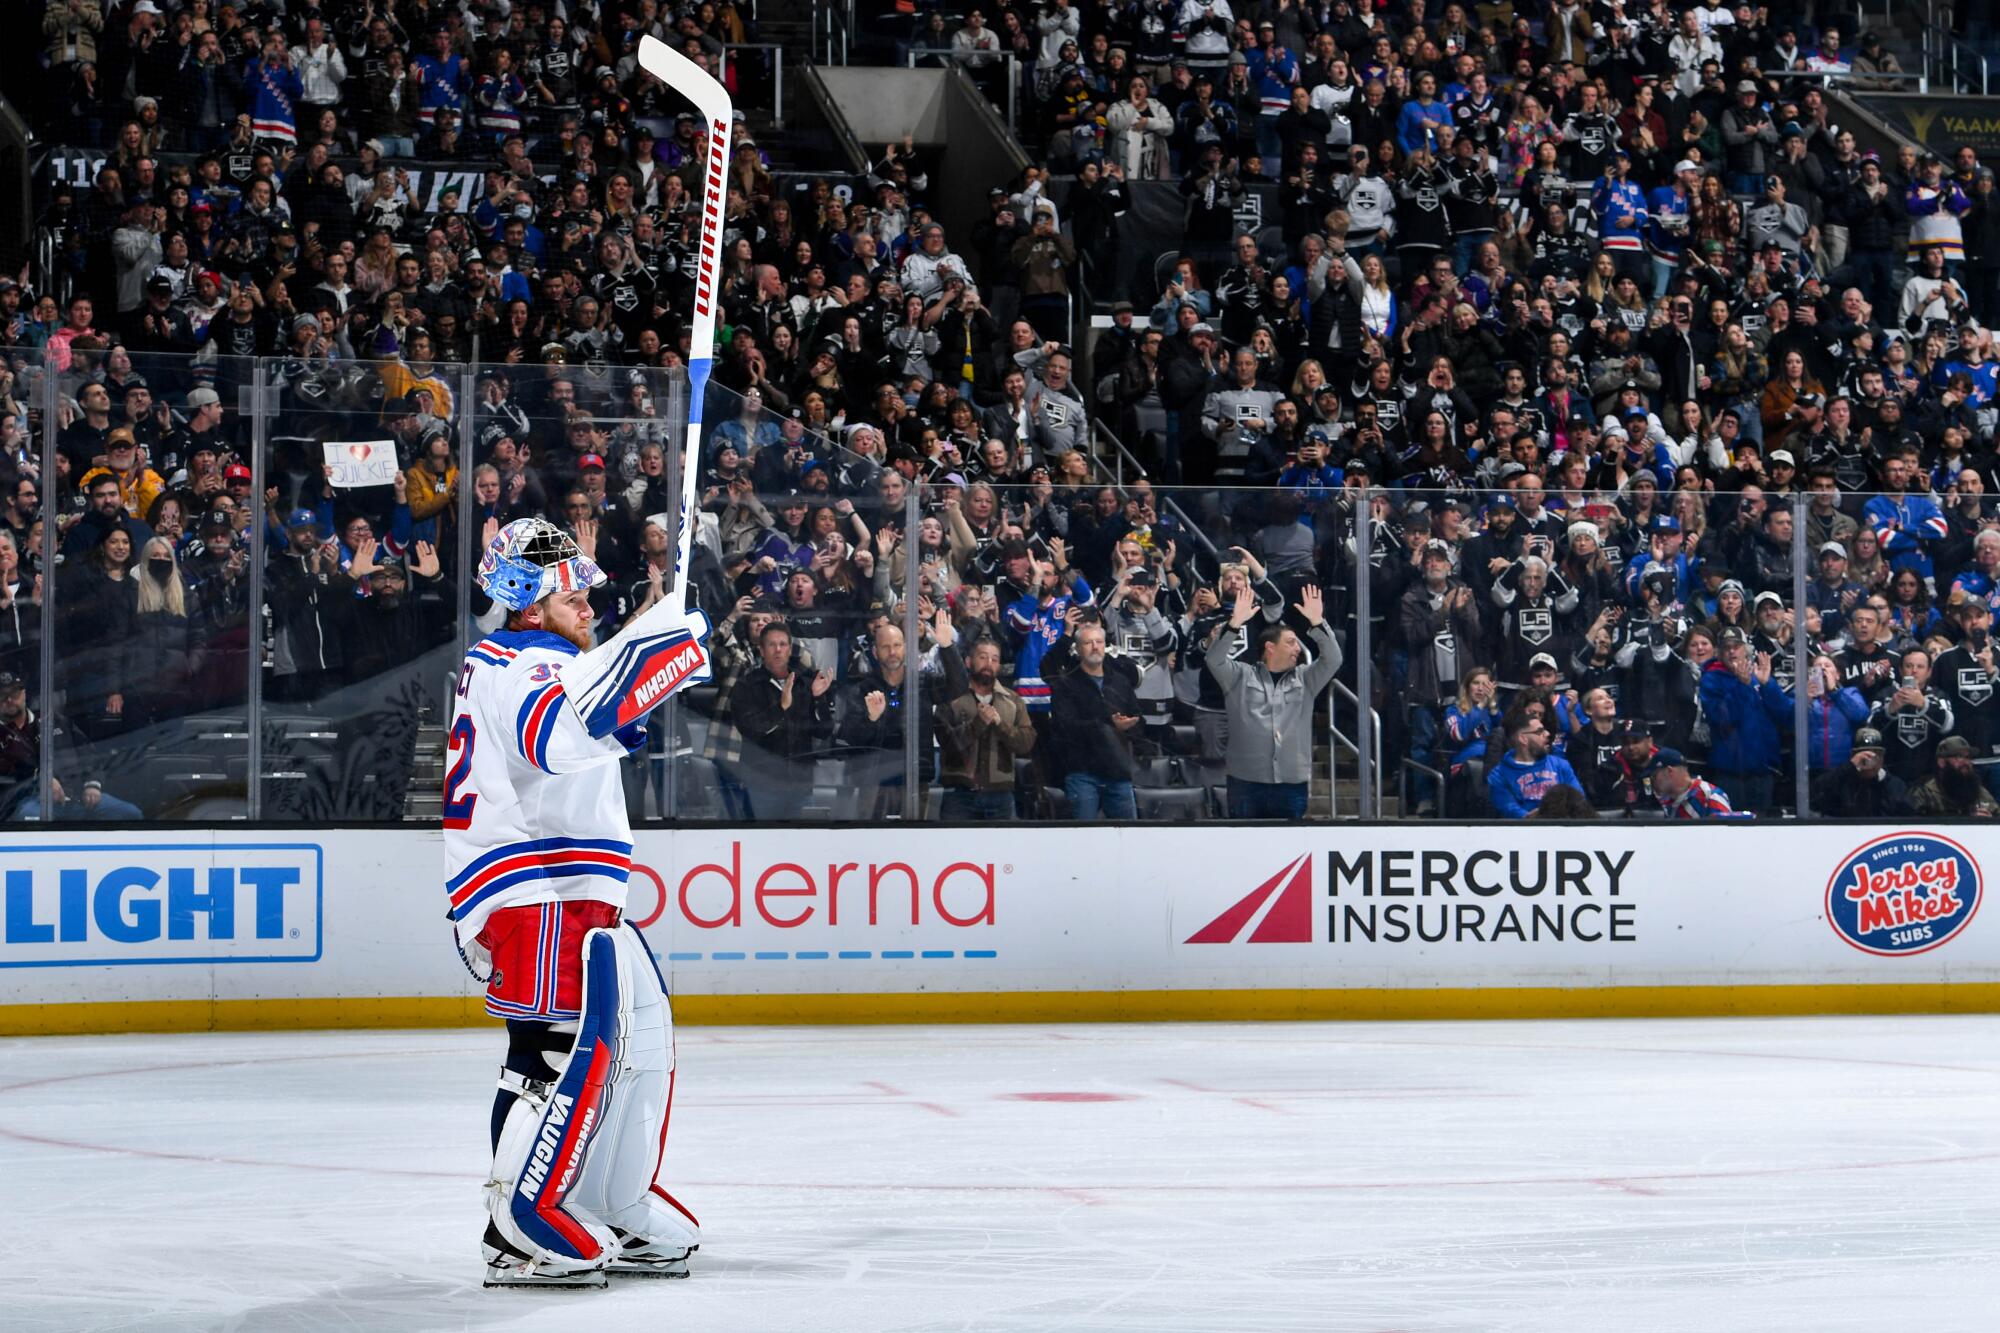 New York Rangers goalie Jonathan Quick raises his hockey stick at the crowd after being applauded.